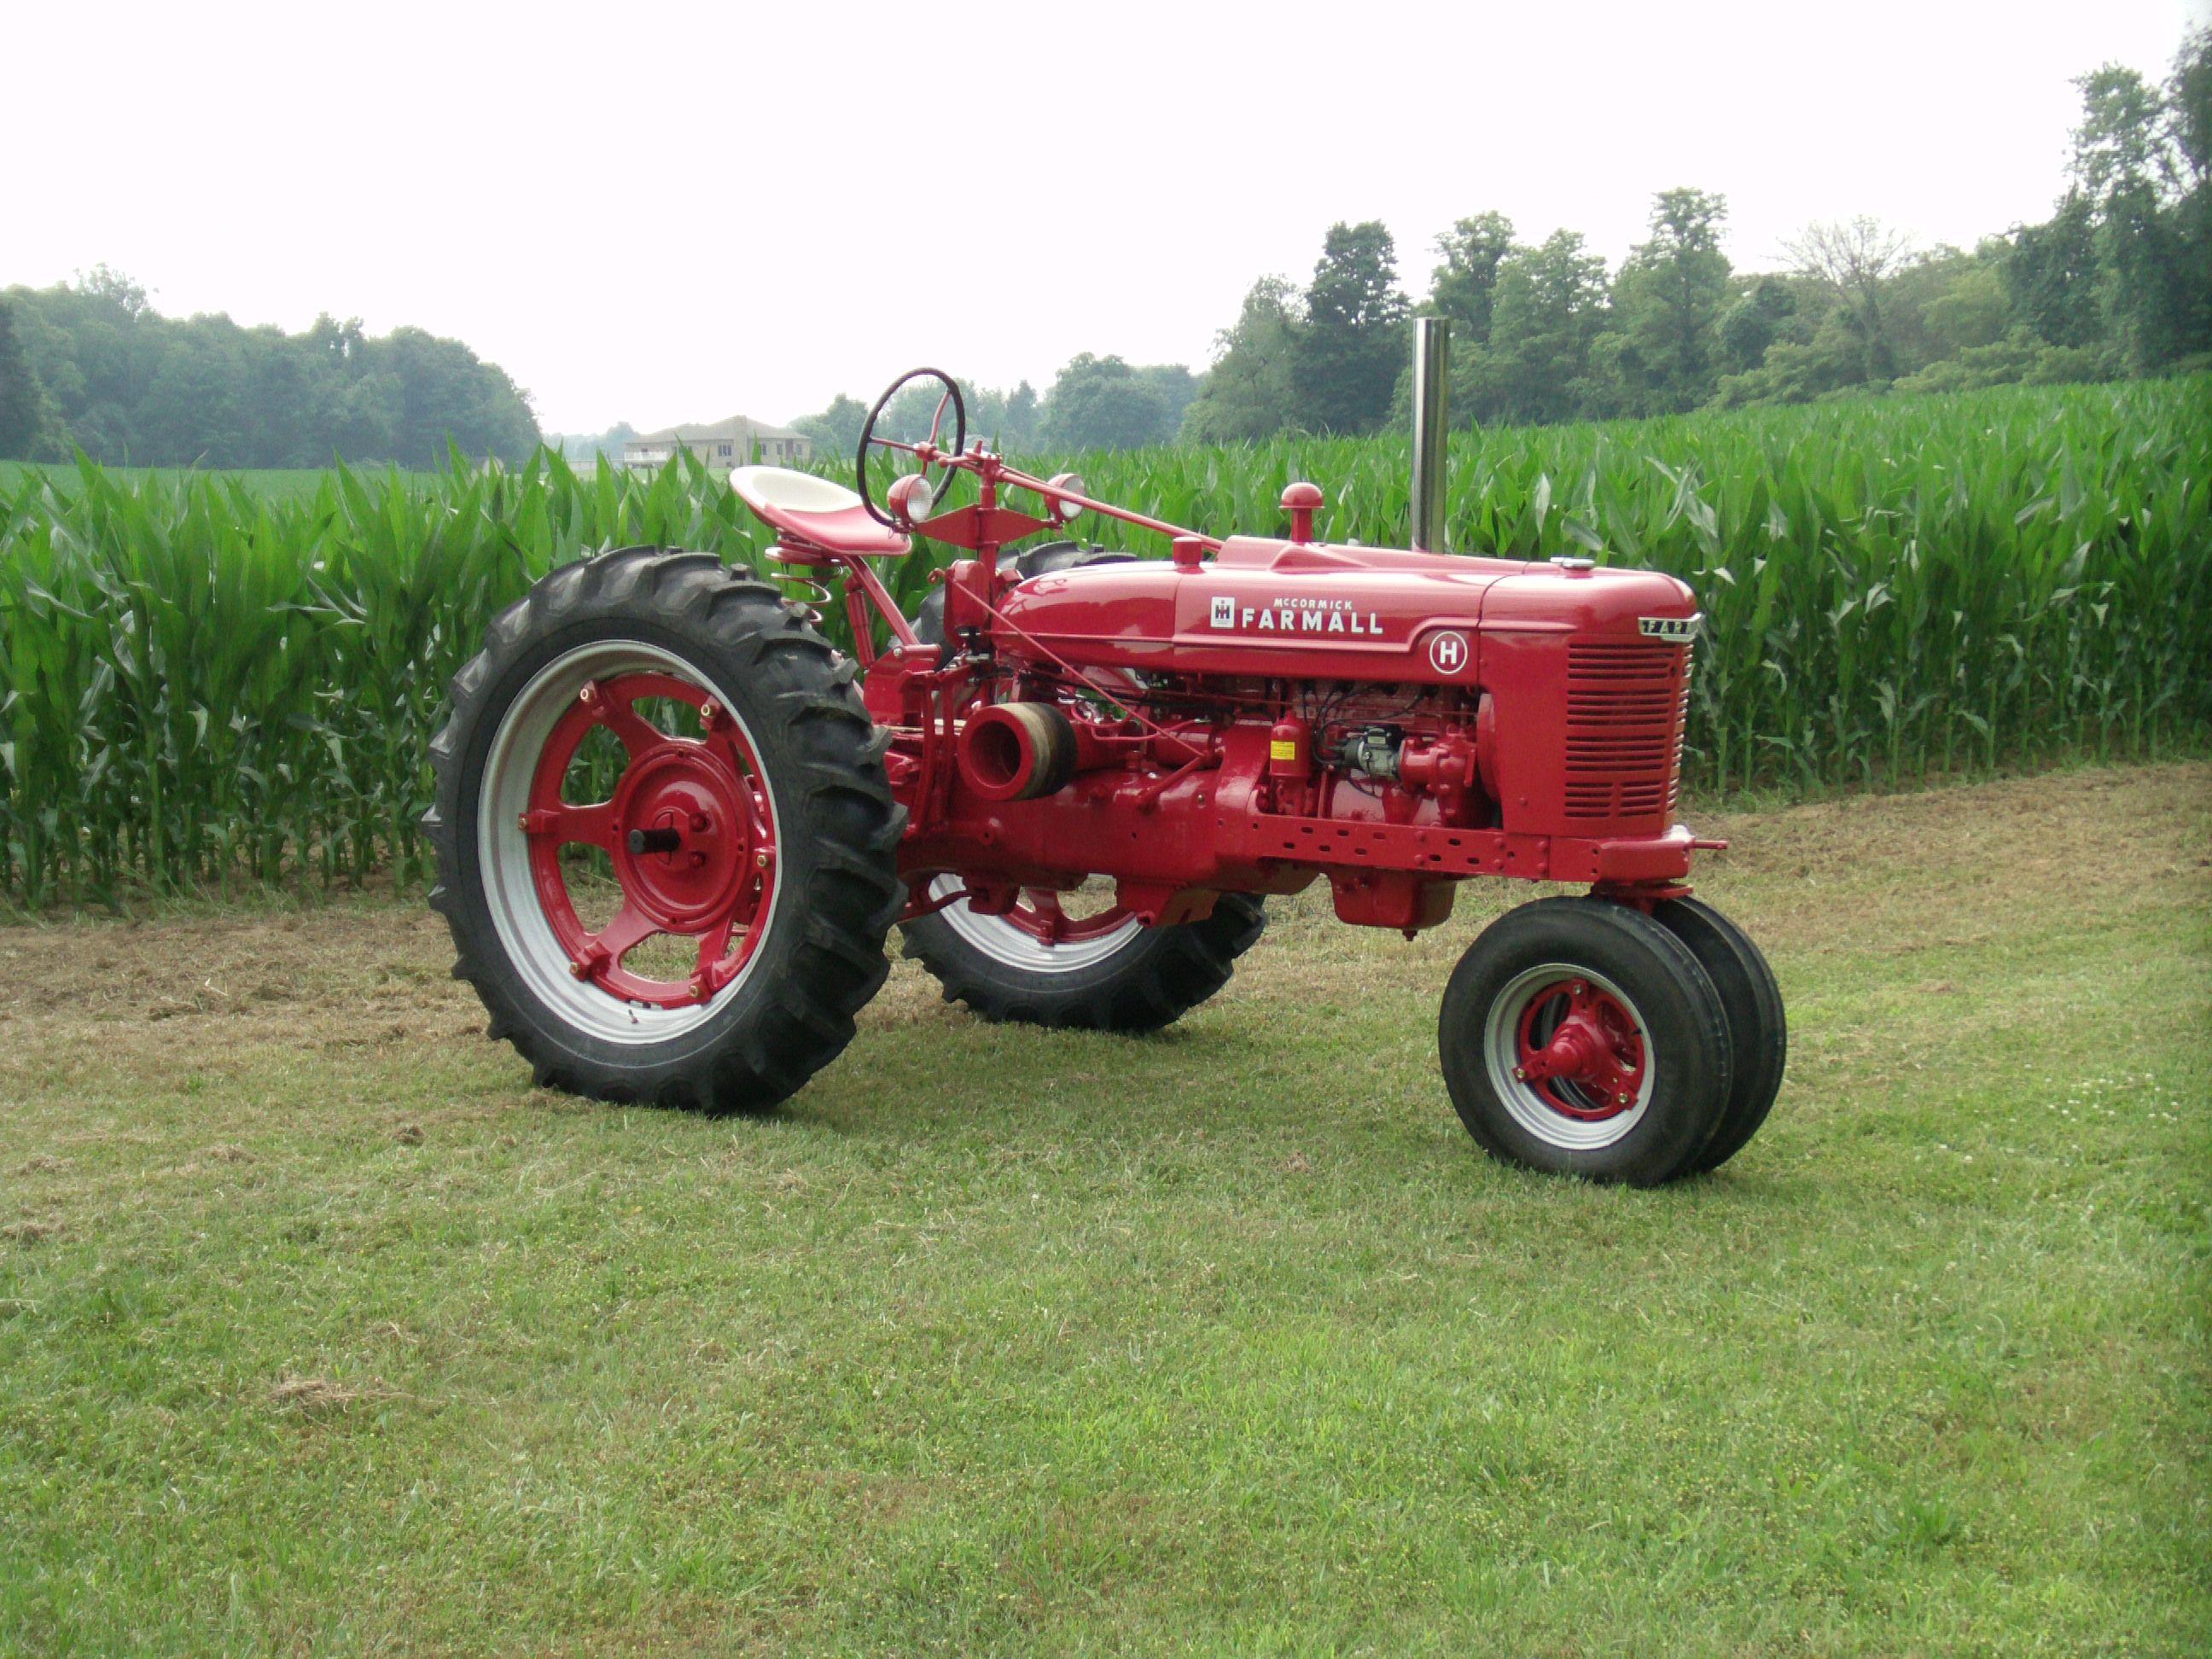 best image about Farmall Tractors. Old tractors